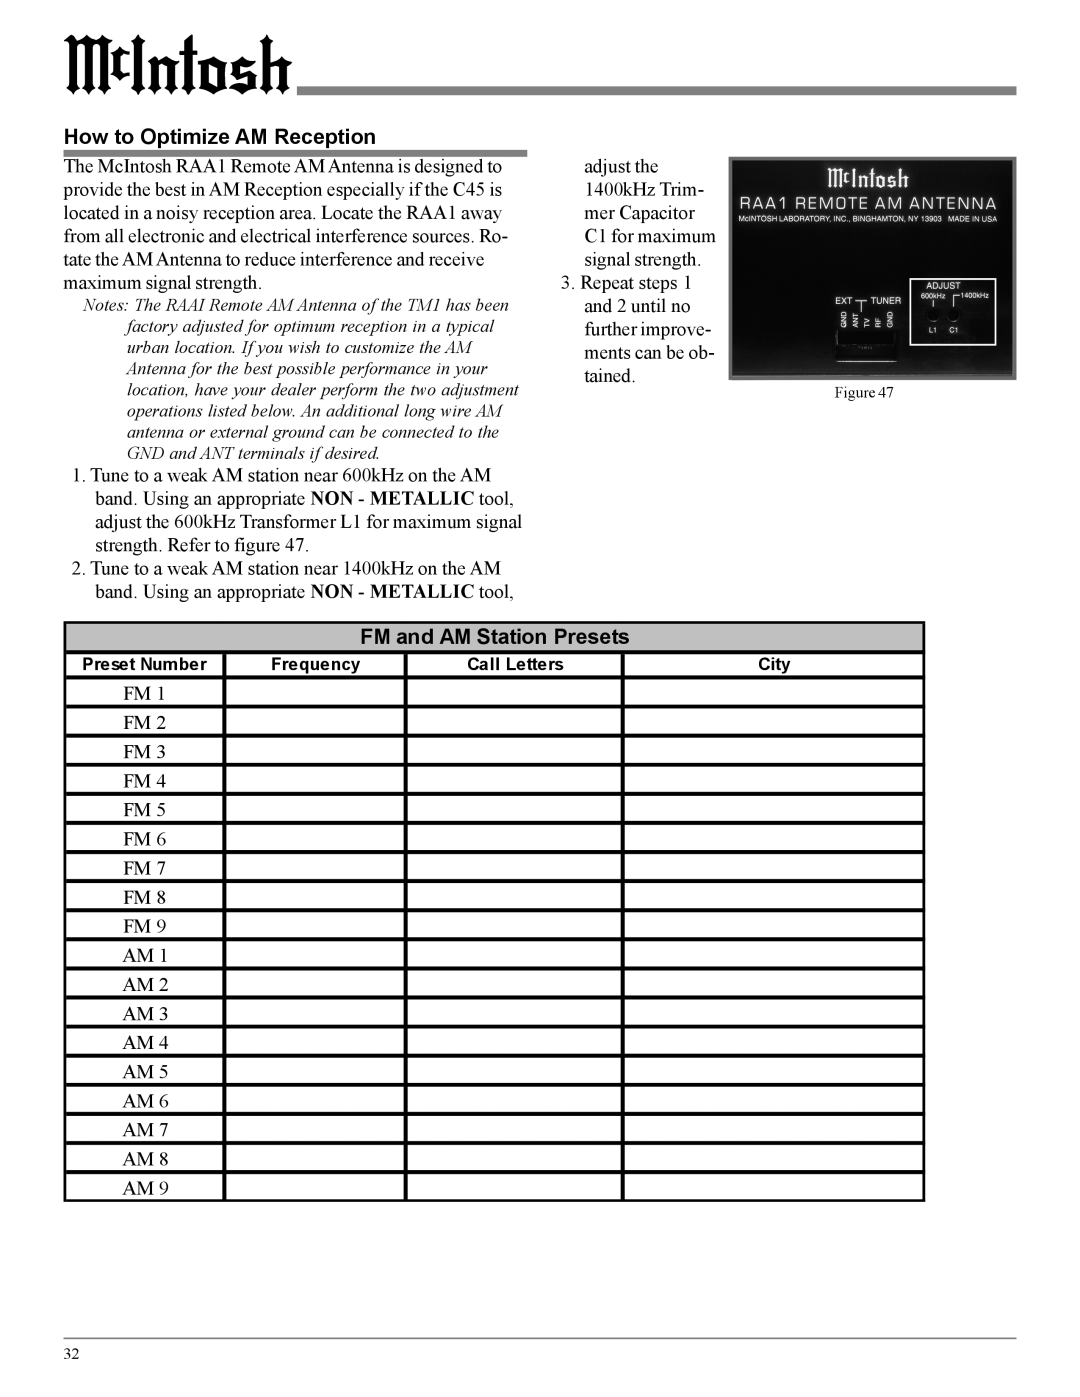 McIntosh C45 owner manual How to Optimize AM Reception, FM and AM Station Presets 